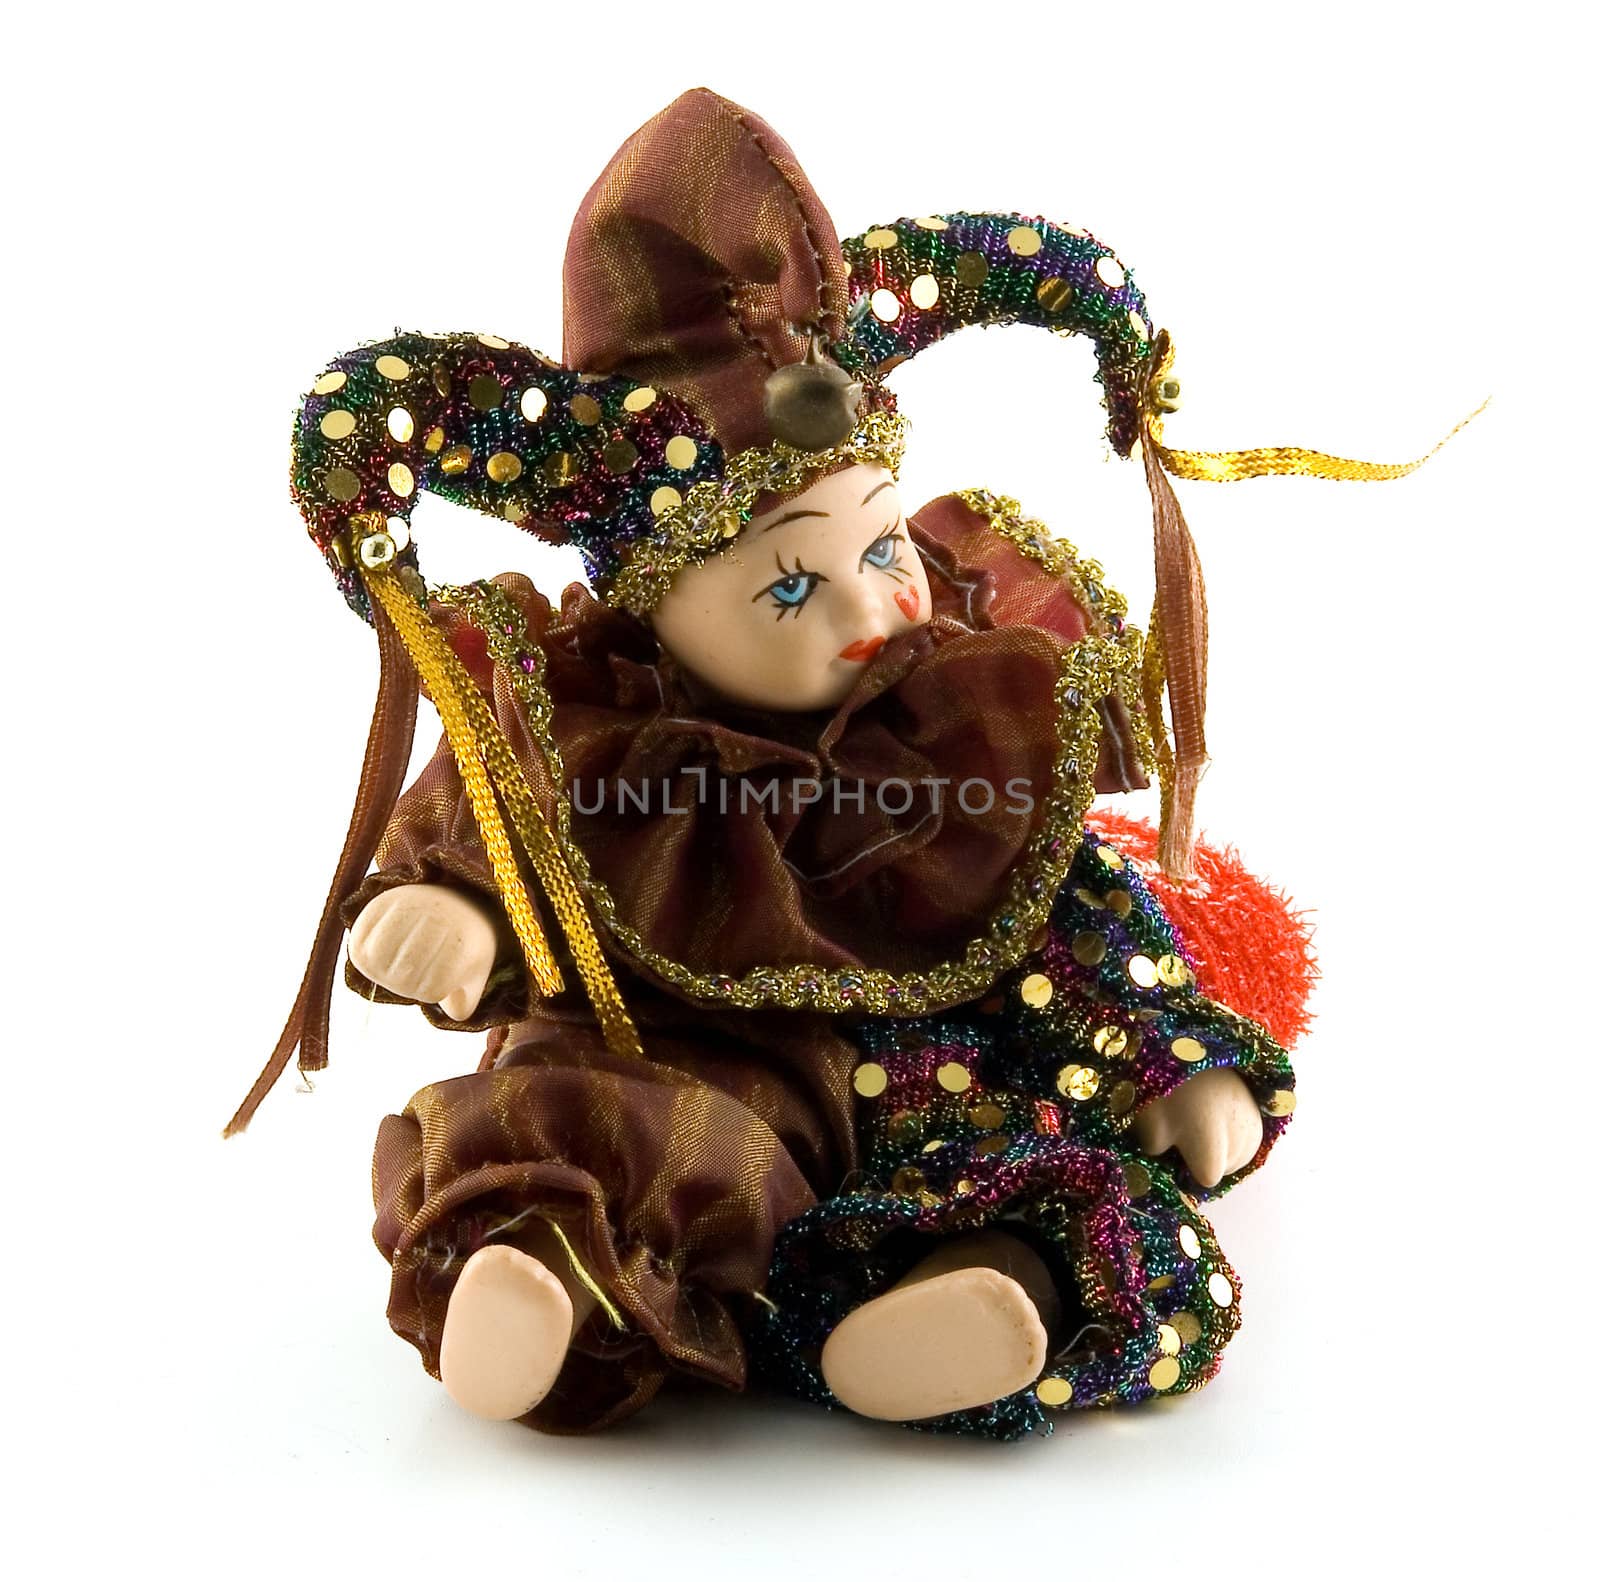 The Venetian doll in traditional carnival costume  Arlecino on a white background. Isolated object.